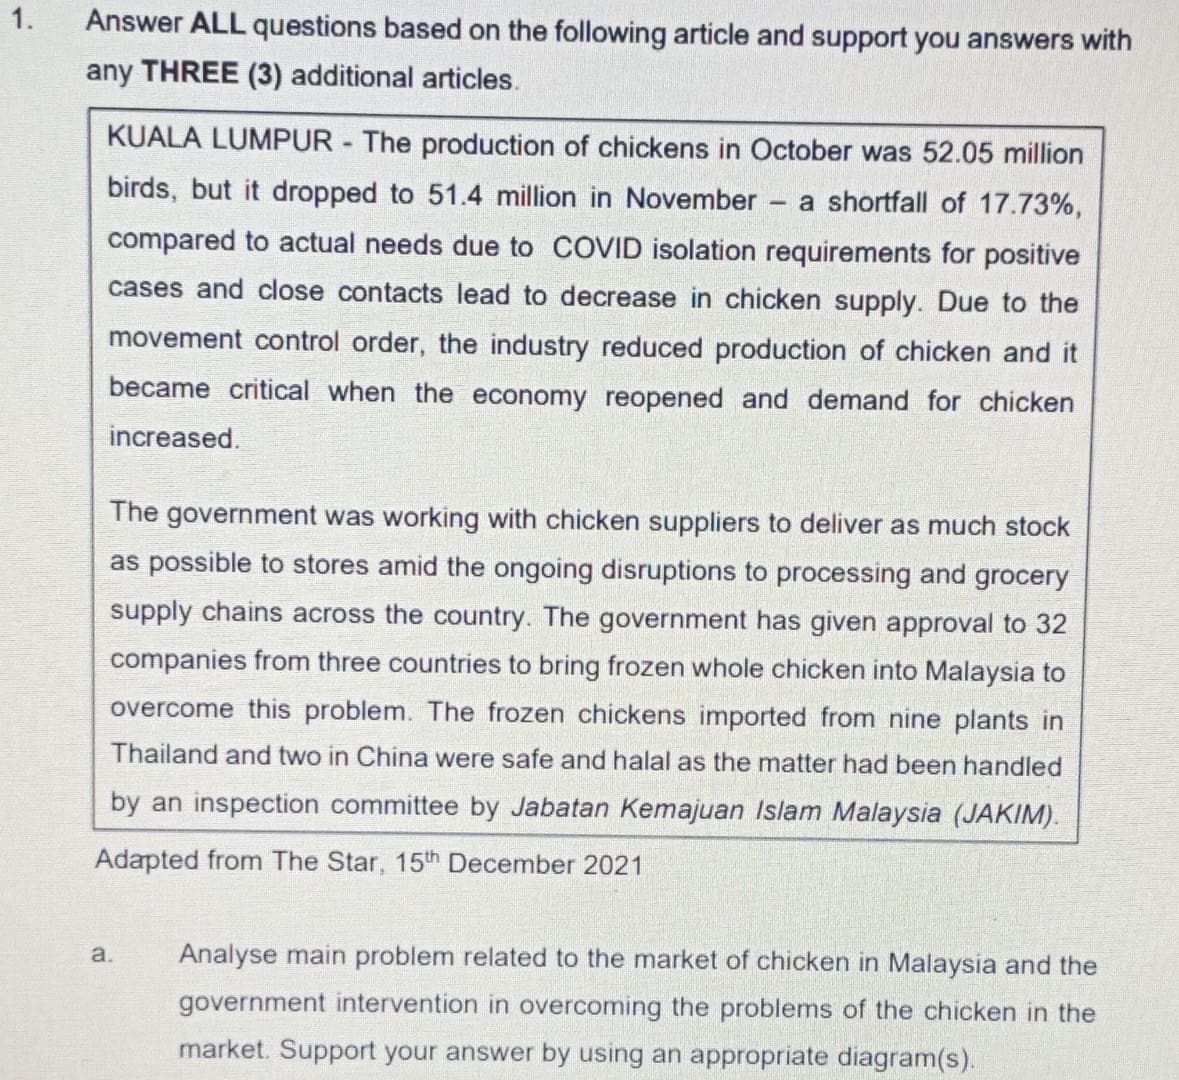 1.
Answer ALL questions based on the following article and support you answers with
any THREE (3) additional articles.
KUALA LUMPUR The production of chickens in October was 52.05 million
birds, but it dropped to 51.4 million in November
a shortfall of 17.73%,
compared to actual needs due to COVID isolation requirements for positive
cases and close contacts lead to decrease in chicken supply. Due to the
movement control order, the industry reduced production of chicken and it
became critical when the economy reopened and demand for chicken
increased.
The government was working with chicken suppliers to deliver as much stock
as possible to stores amid the ongoing disruptions to processing and grocery
supply chains across the country. The government has given approval to 32
companies from three countries to bring frozen whole chicken into Malaysia to
overcome this problem. The frozen chickens imported from nine plants in
Thailand and two in China were safe and halal as the matter had been handled
by an inspection committee by Jabatan Kemajuan Islam Malaysia (JAKIM).
Adapted from The Star, 15th December 2021
a.
Analyse main problem related to the market of chicken in Malaysia and the
government intervention in overcoming the problems of the chicken in the
market. Support your answer by using an appropriate diagram(s).
